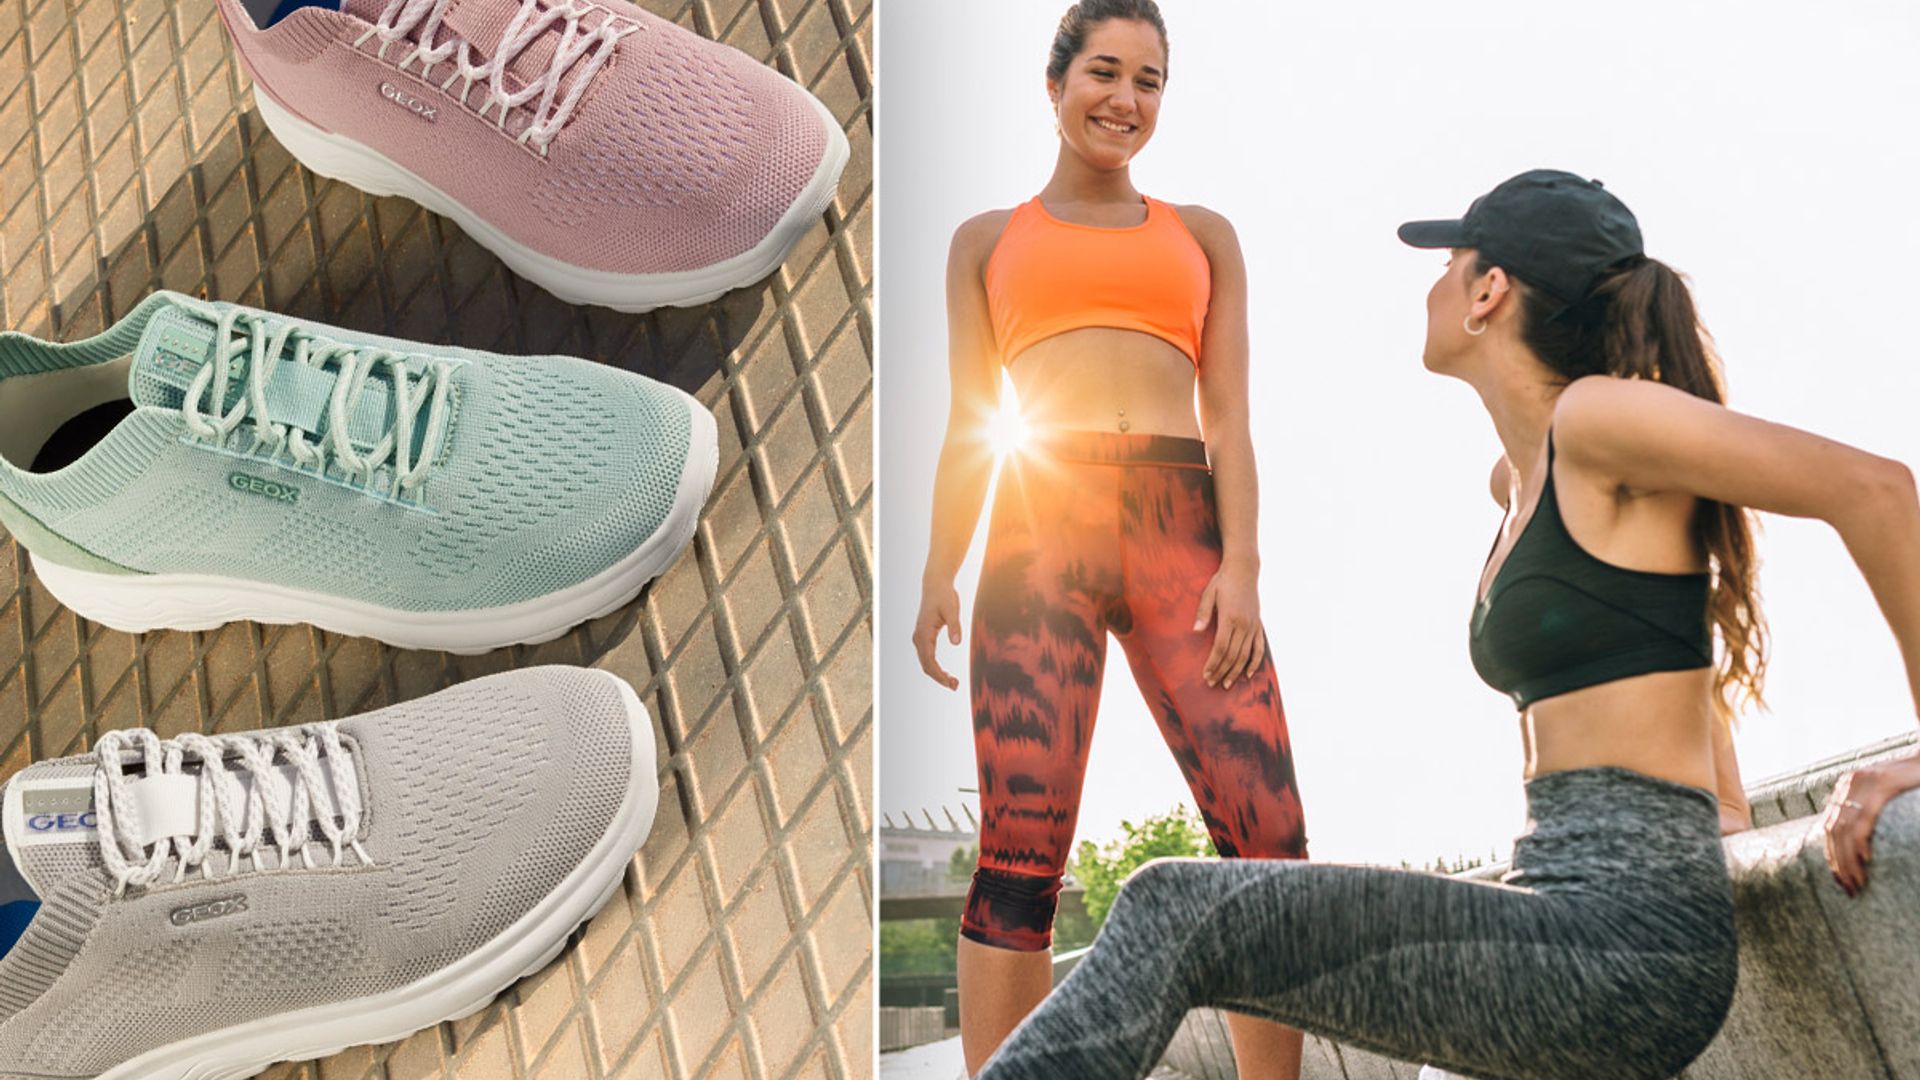 A-list personal trainers Dalton Wong & Sarah Lindsay reveal pro fitness tips - plus what gear to wear